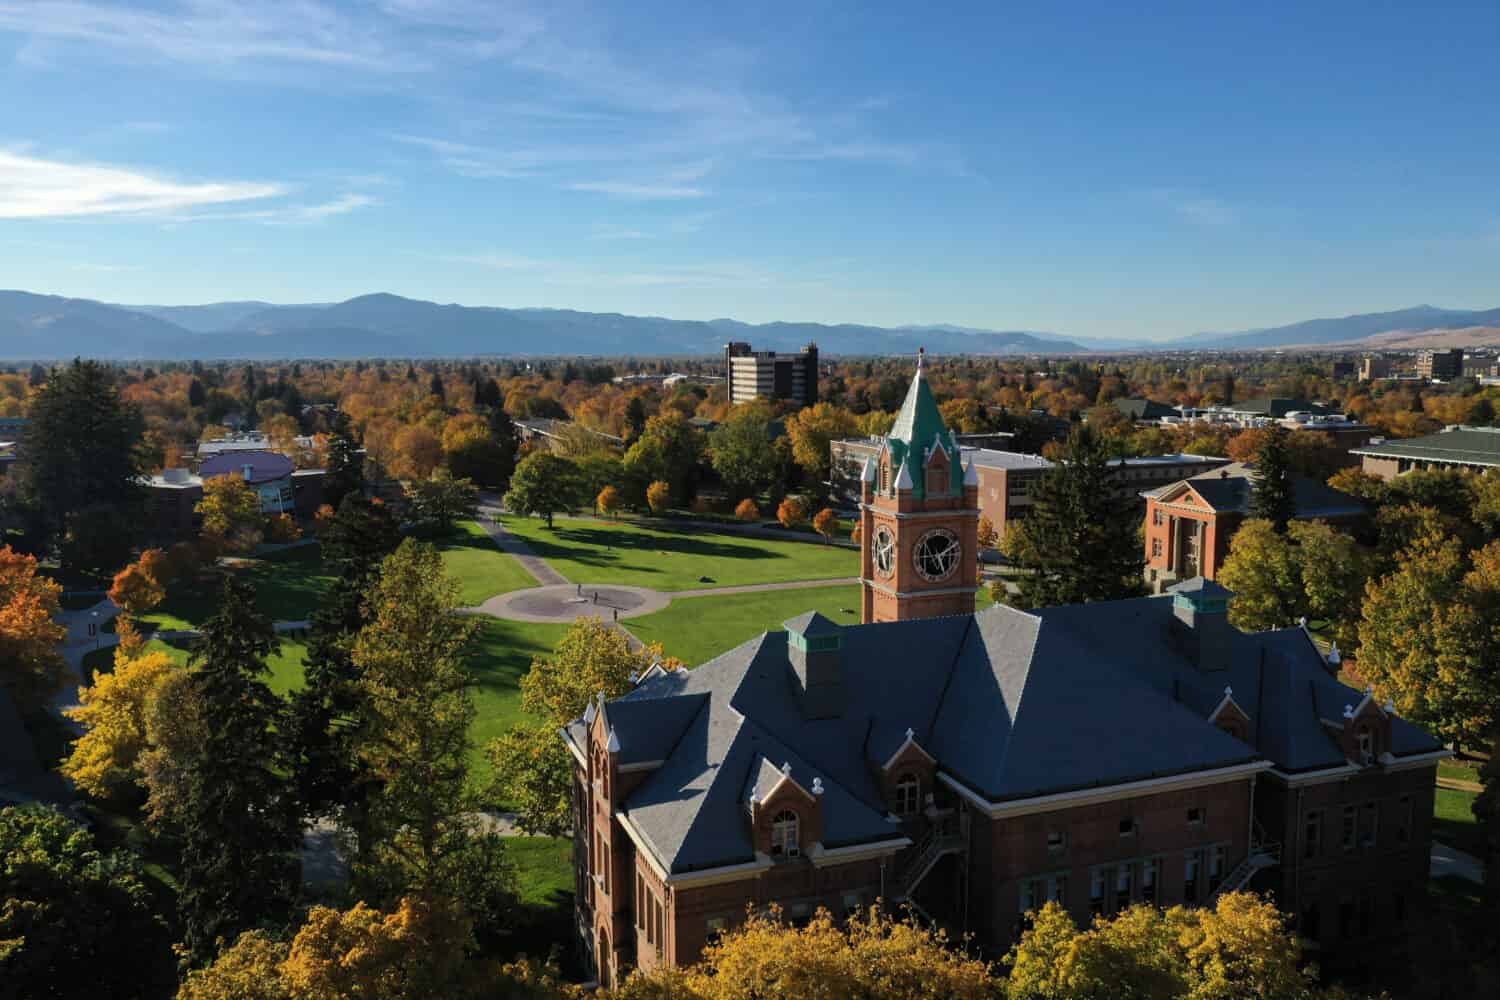 Looking northeast over the Main Hall clock tower and The Oval at the University of Montana during Autumn, with the Missoula Valley stretching out into the distance.